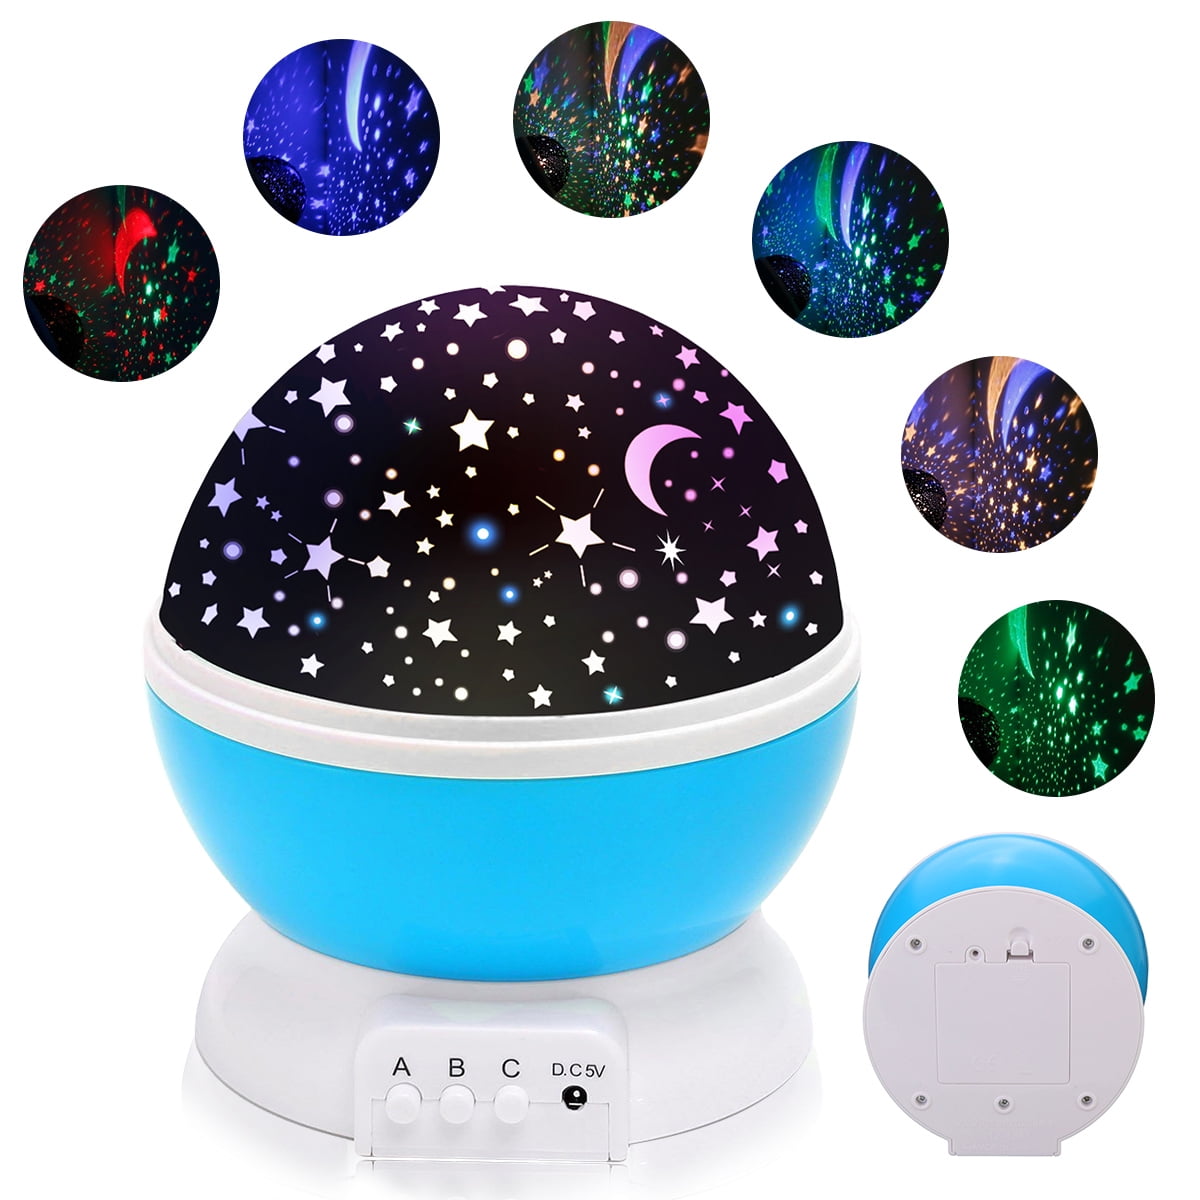 LED Rotation Cosmos Ocean Sky Music Star Projector Night Light Bed Lamp Gifts ~ 